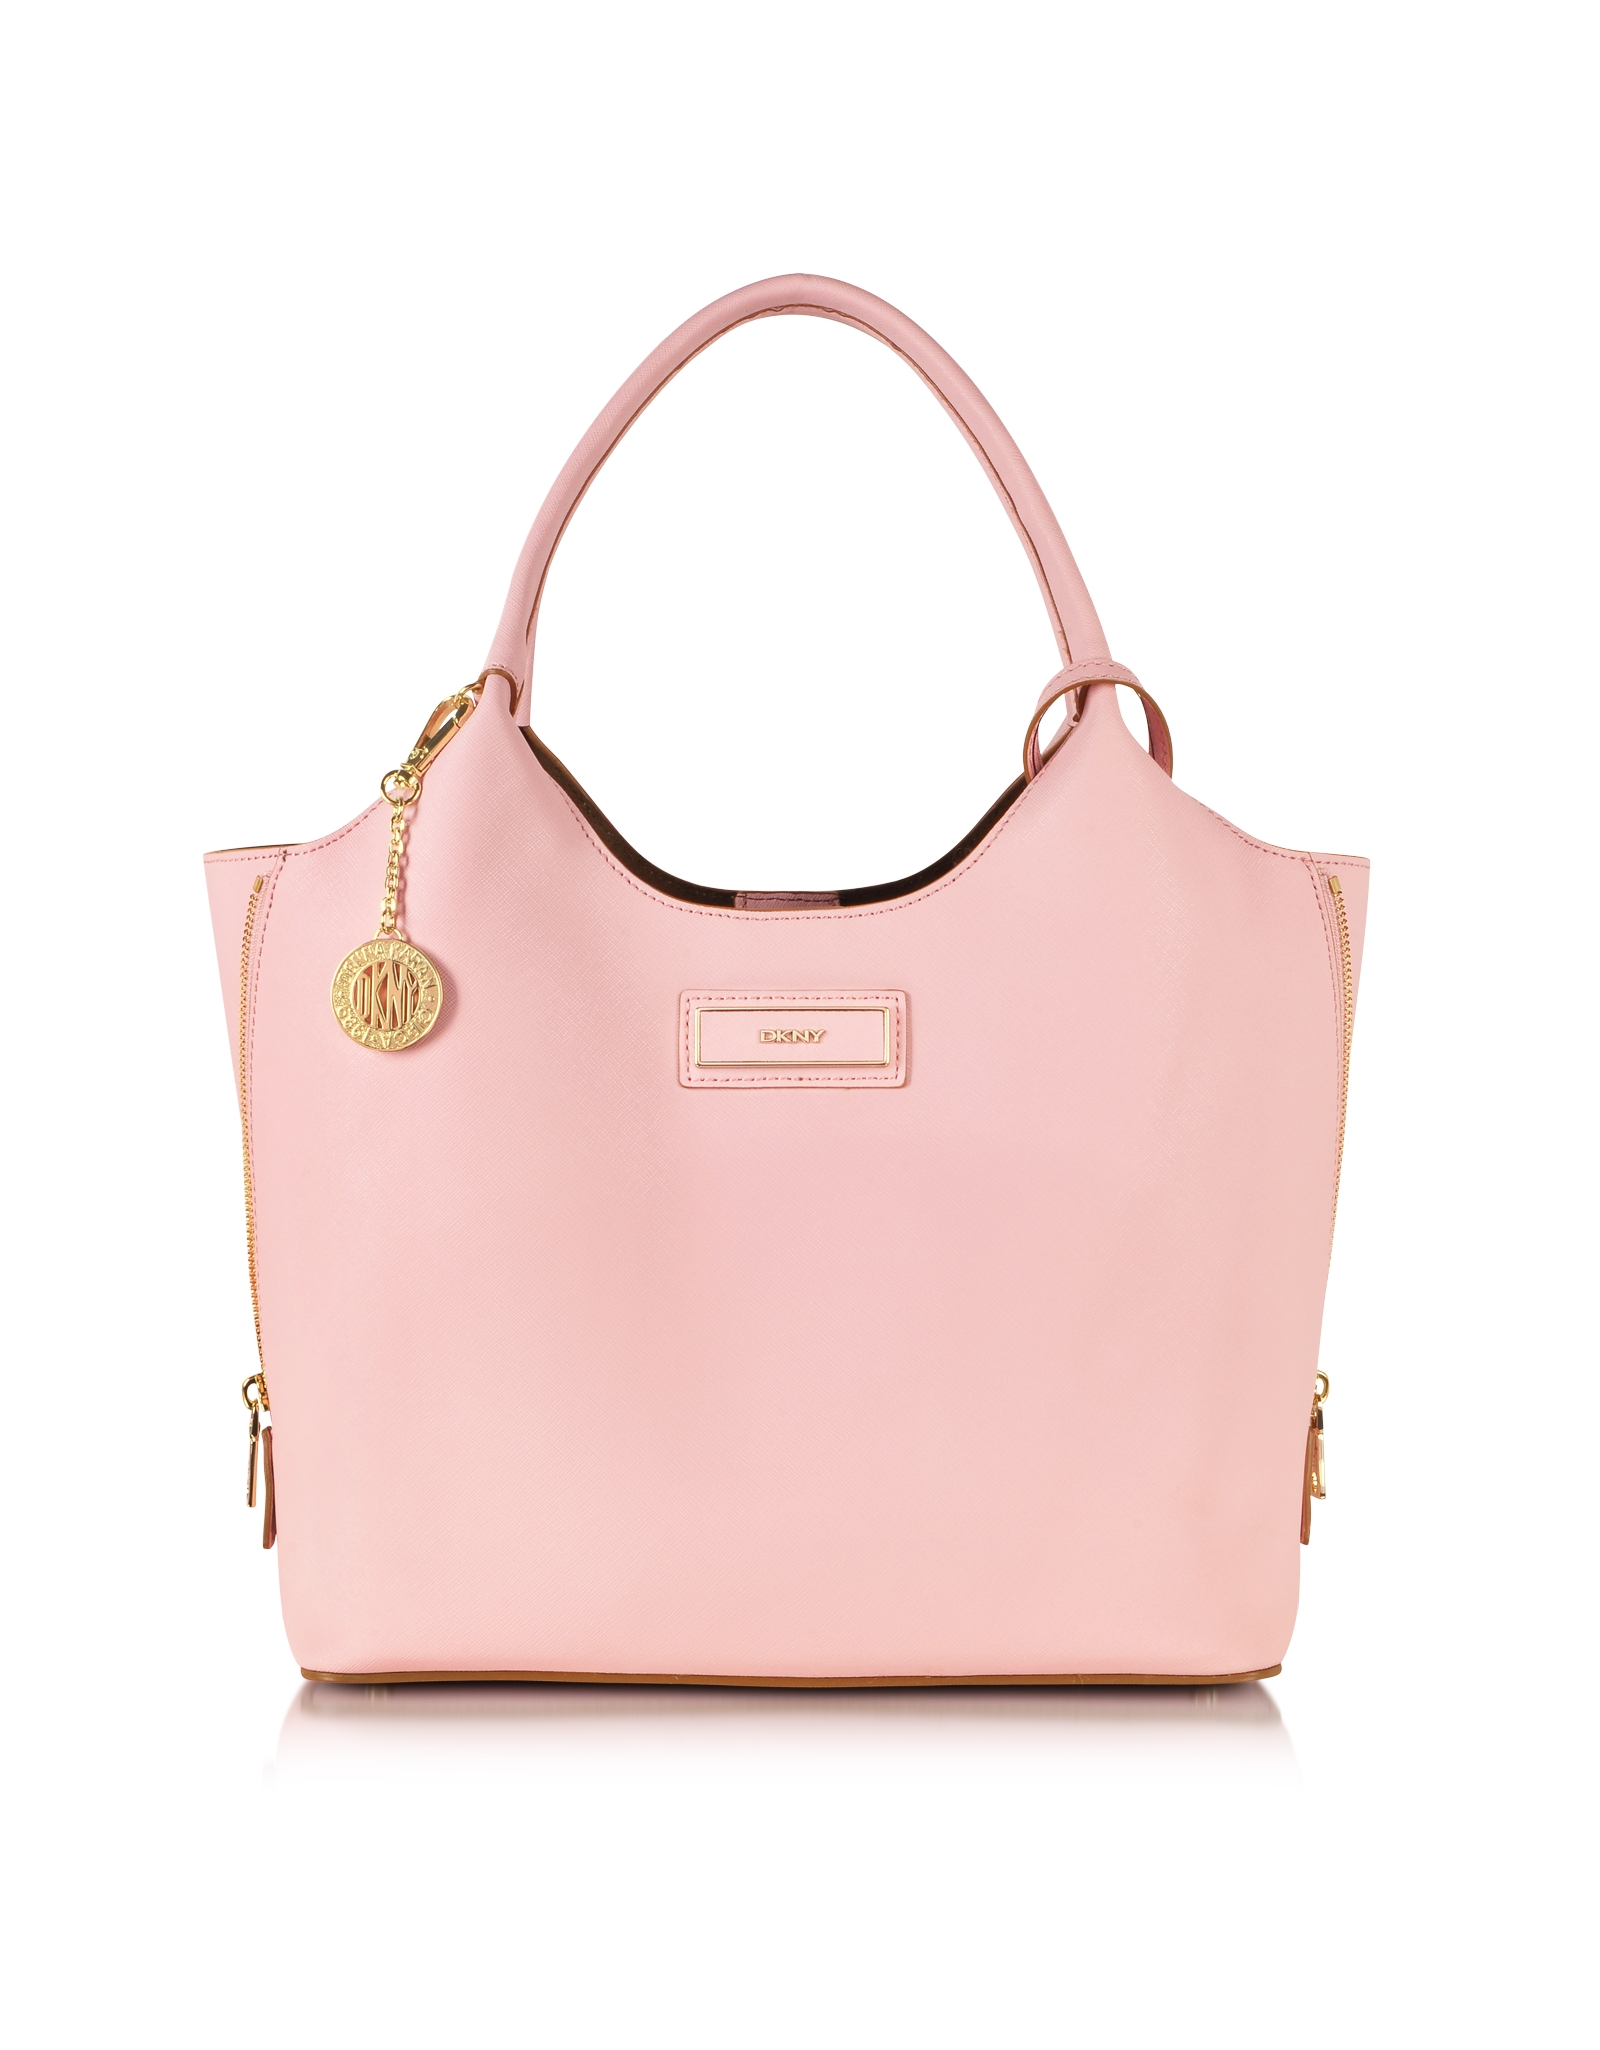 Lyst - Dkny Bryant Park Saffiano Leather Zip Tote in Pink